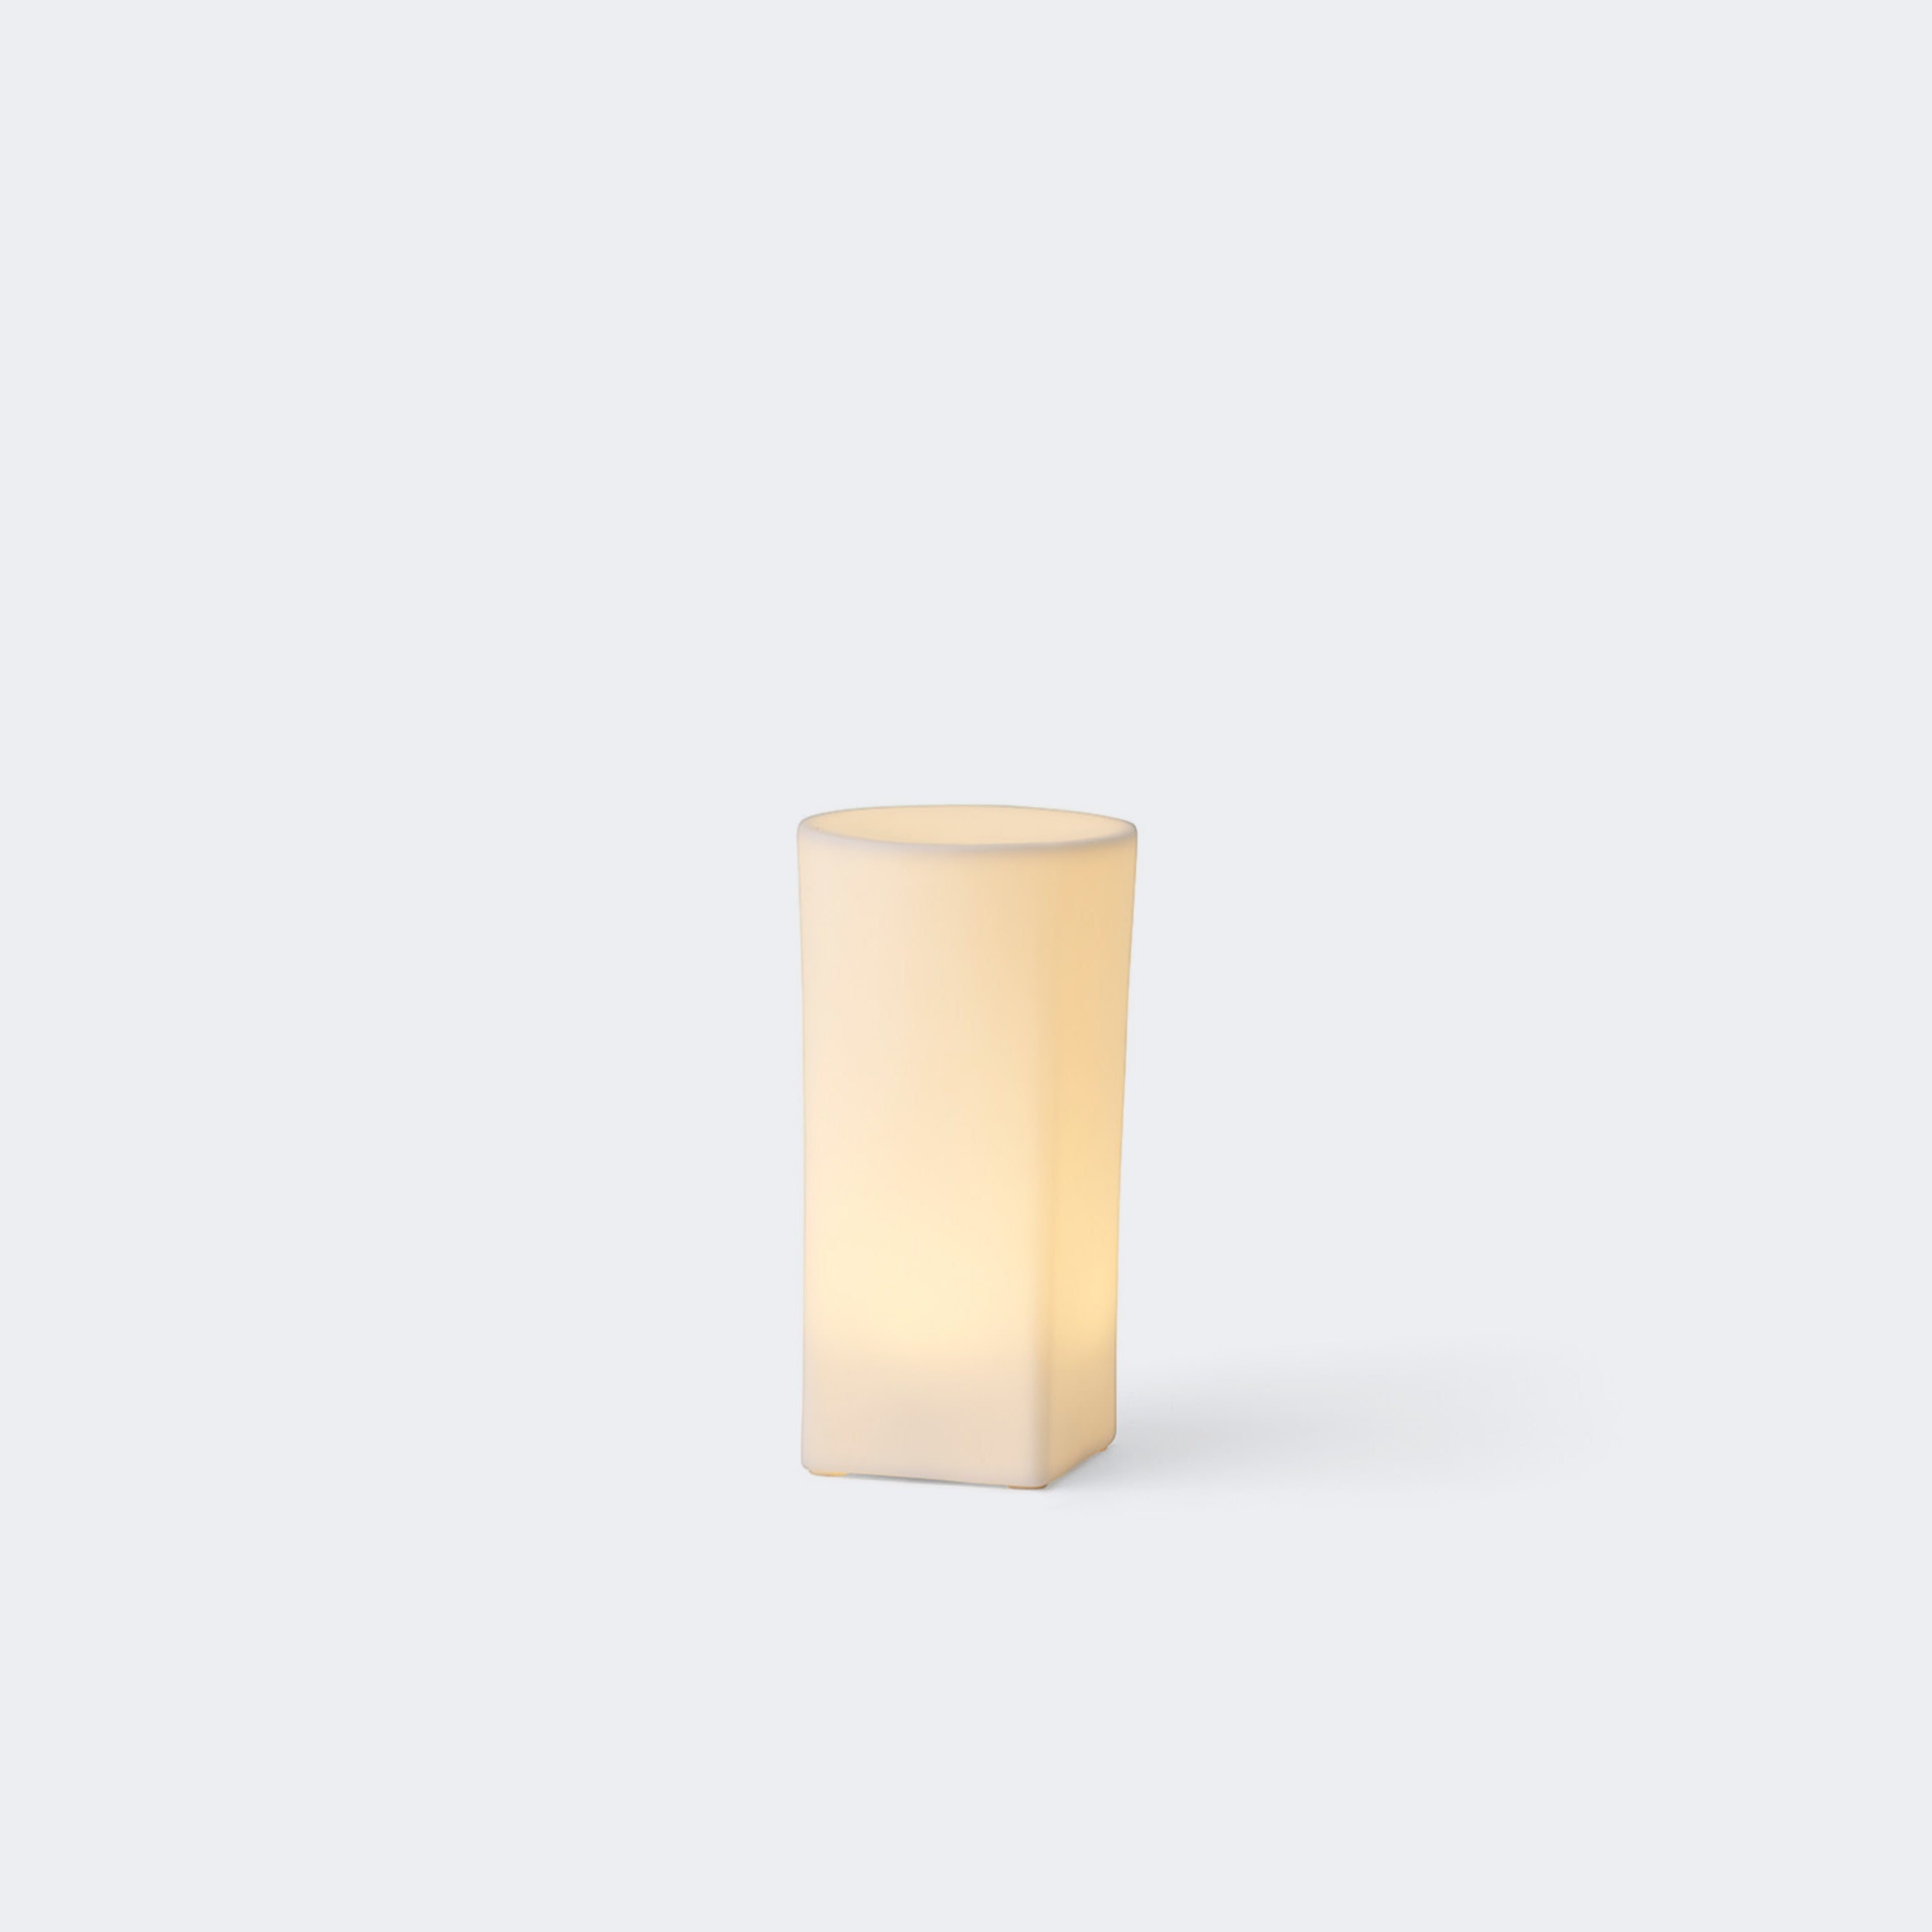 Audo Copenhagen Ignus Flameless Candle 6in - KANSO#Select Size_6in